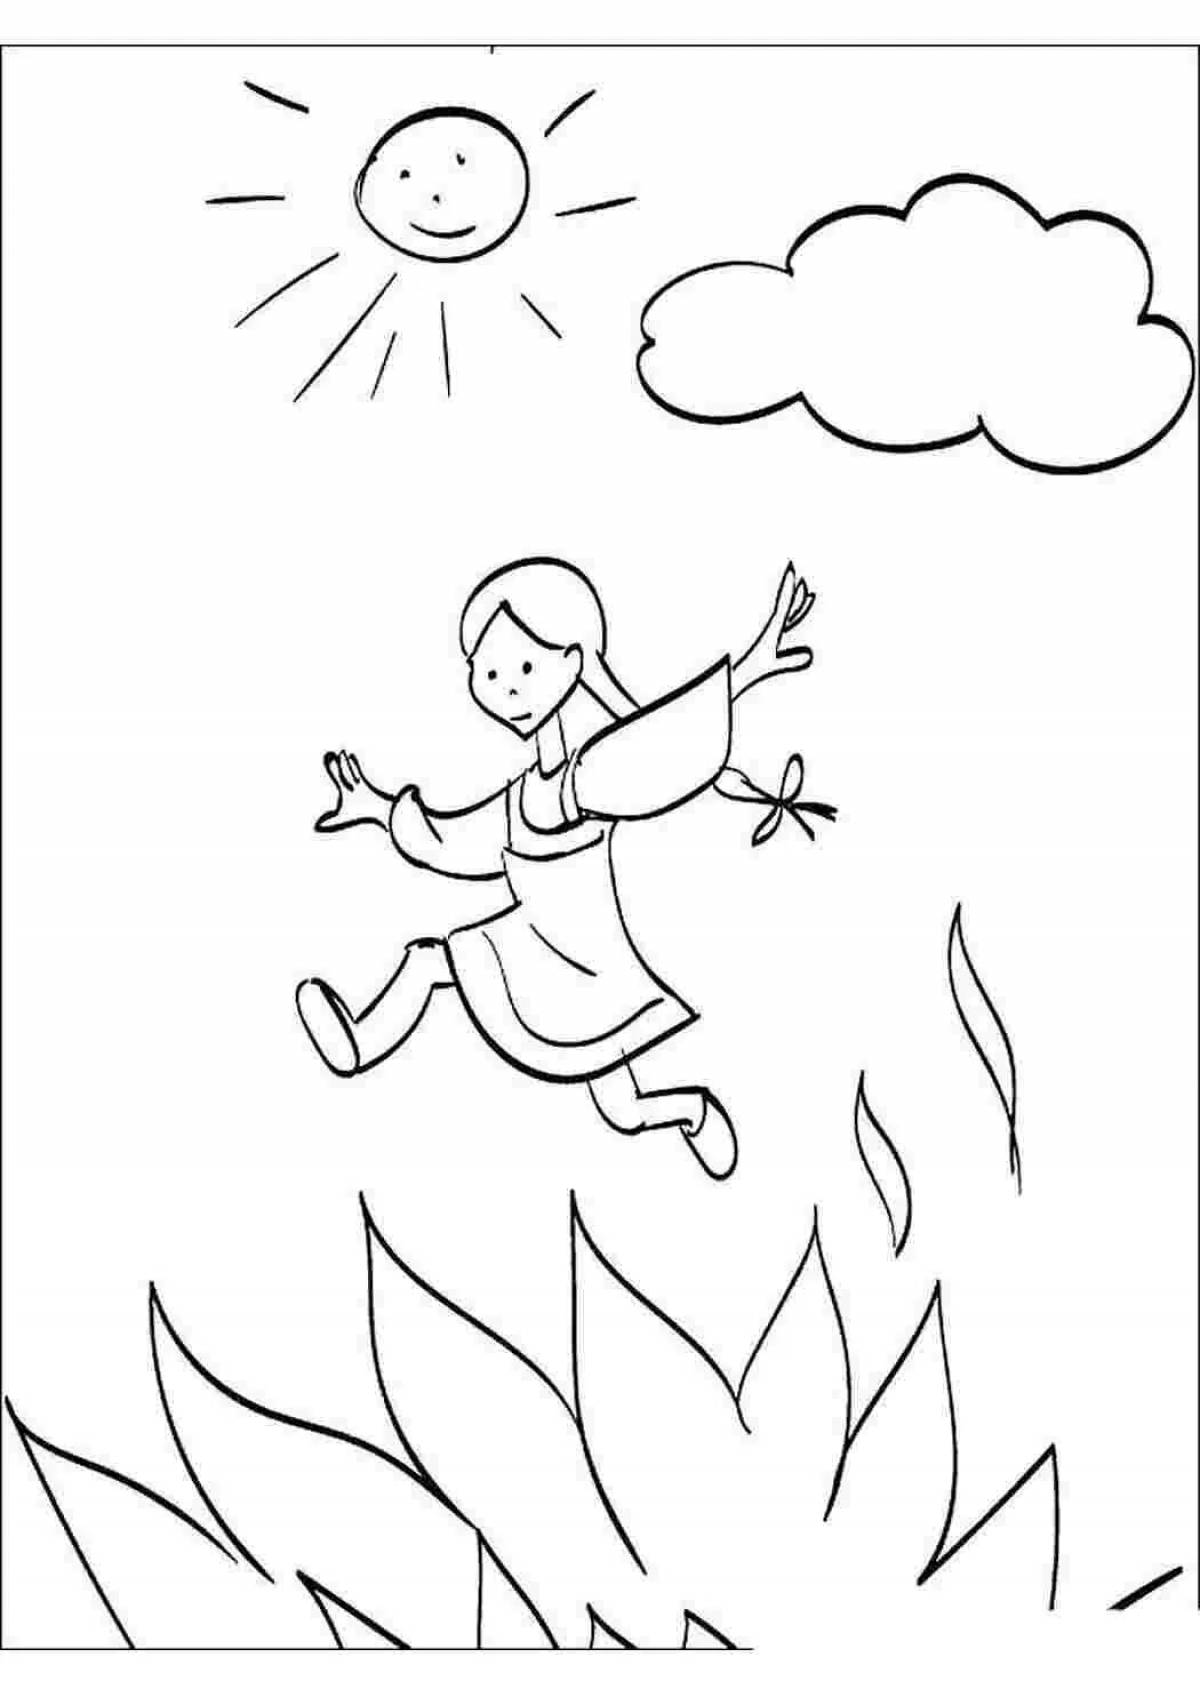 Jumping fire glitter coloring page